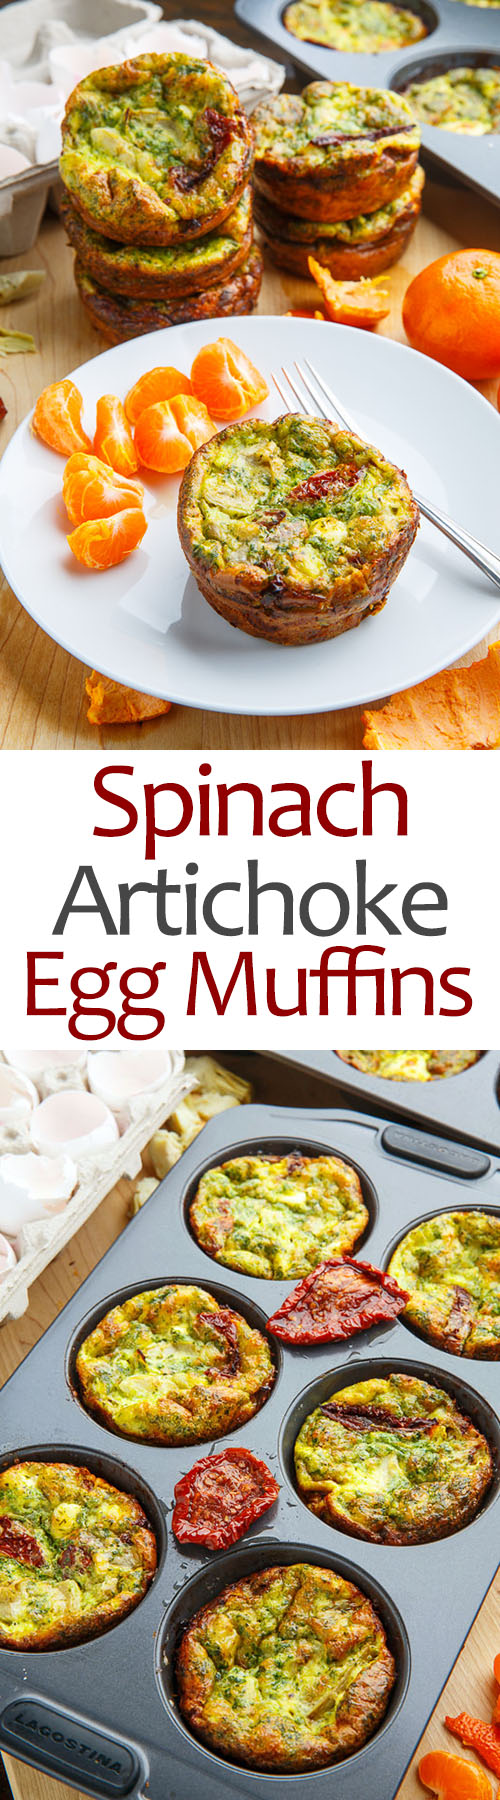 Spinach and Artichoke Egg Muffins with Sundried Tomatoes